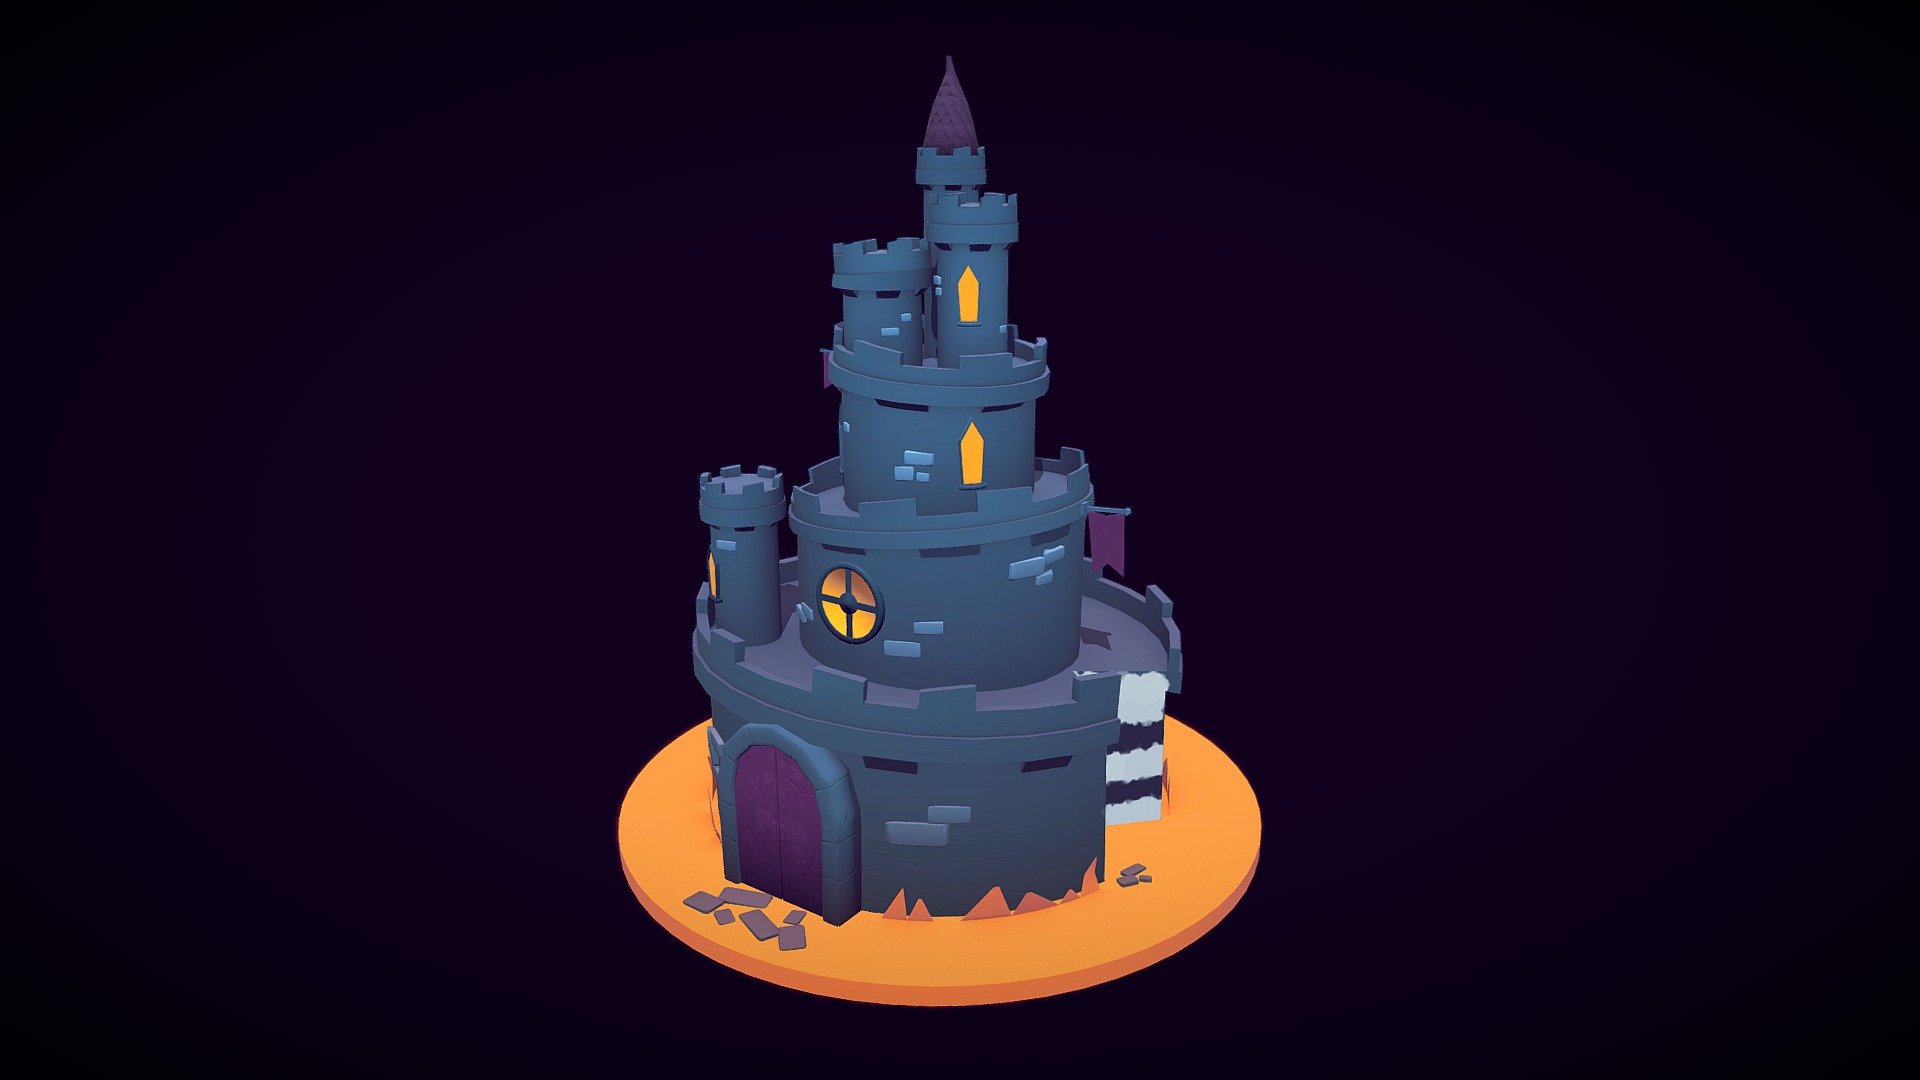 This little castle turned out to be a cake! Just like in those videos on TikTok, when someone start to cut everything around and everything is cake. Weird! 
My attempt for #sketchfabweekychallenge. Hope you like it! Thanks! - Castle Cake - Stylized - 3D model by Alex_Pepper (@aleksander.smirnov992) 3d model